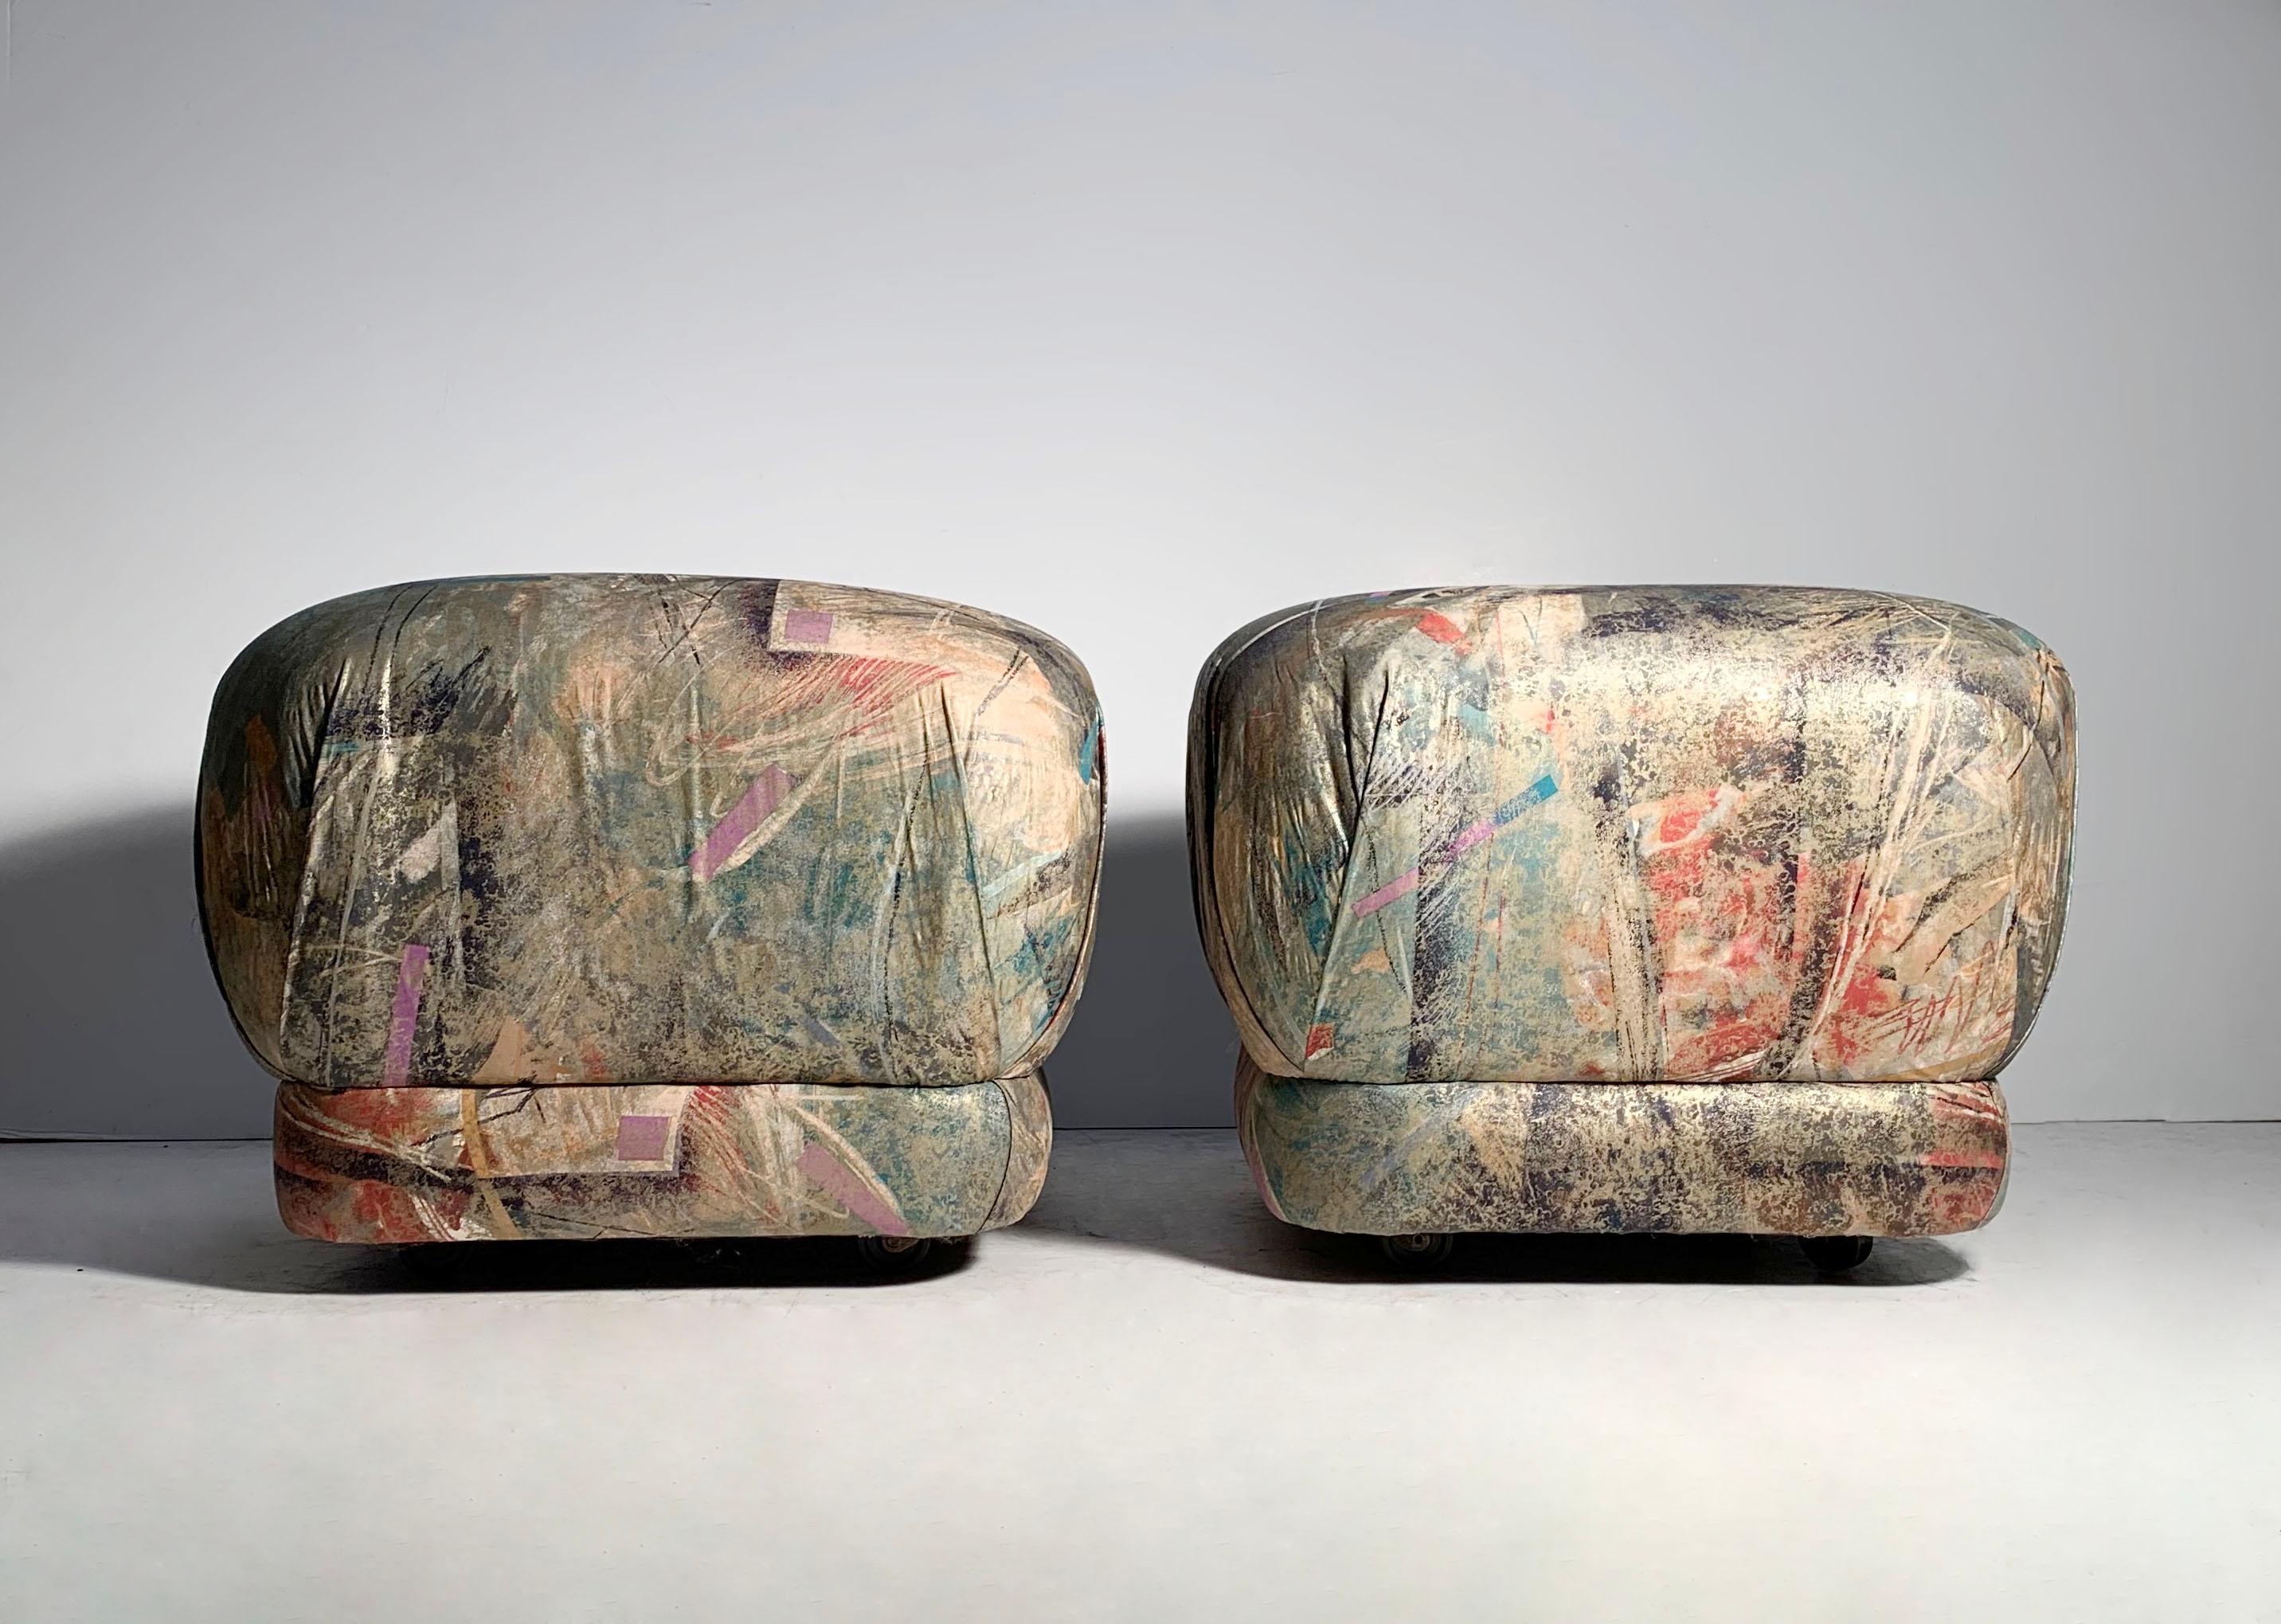 Pair of Post Modern Pouf ottoman stools on castors in the manner of Karl Springer.
Original owner purchased from Merchandise Mart in Chicago (A High End Decorator Designer Market)

I would recommend replacing the Castors on these as they do not